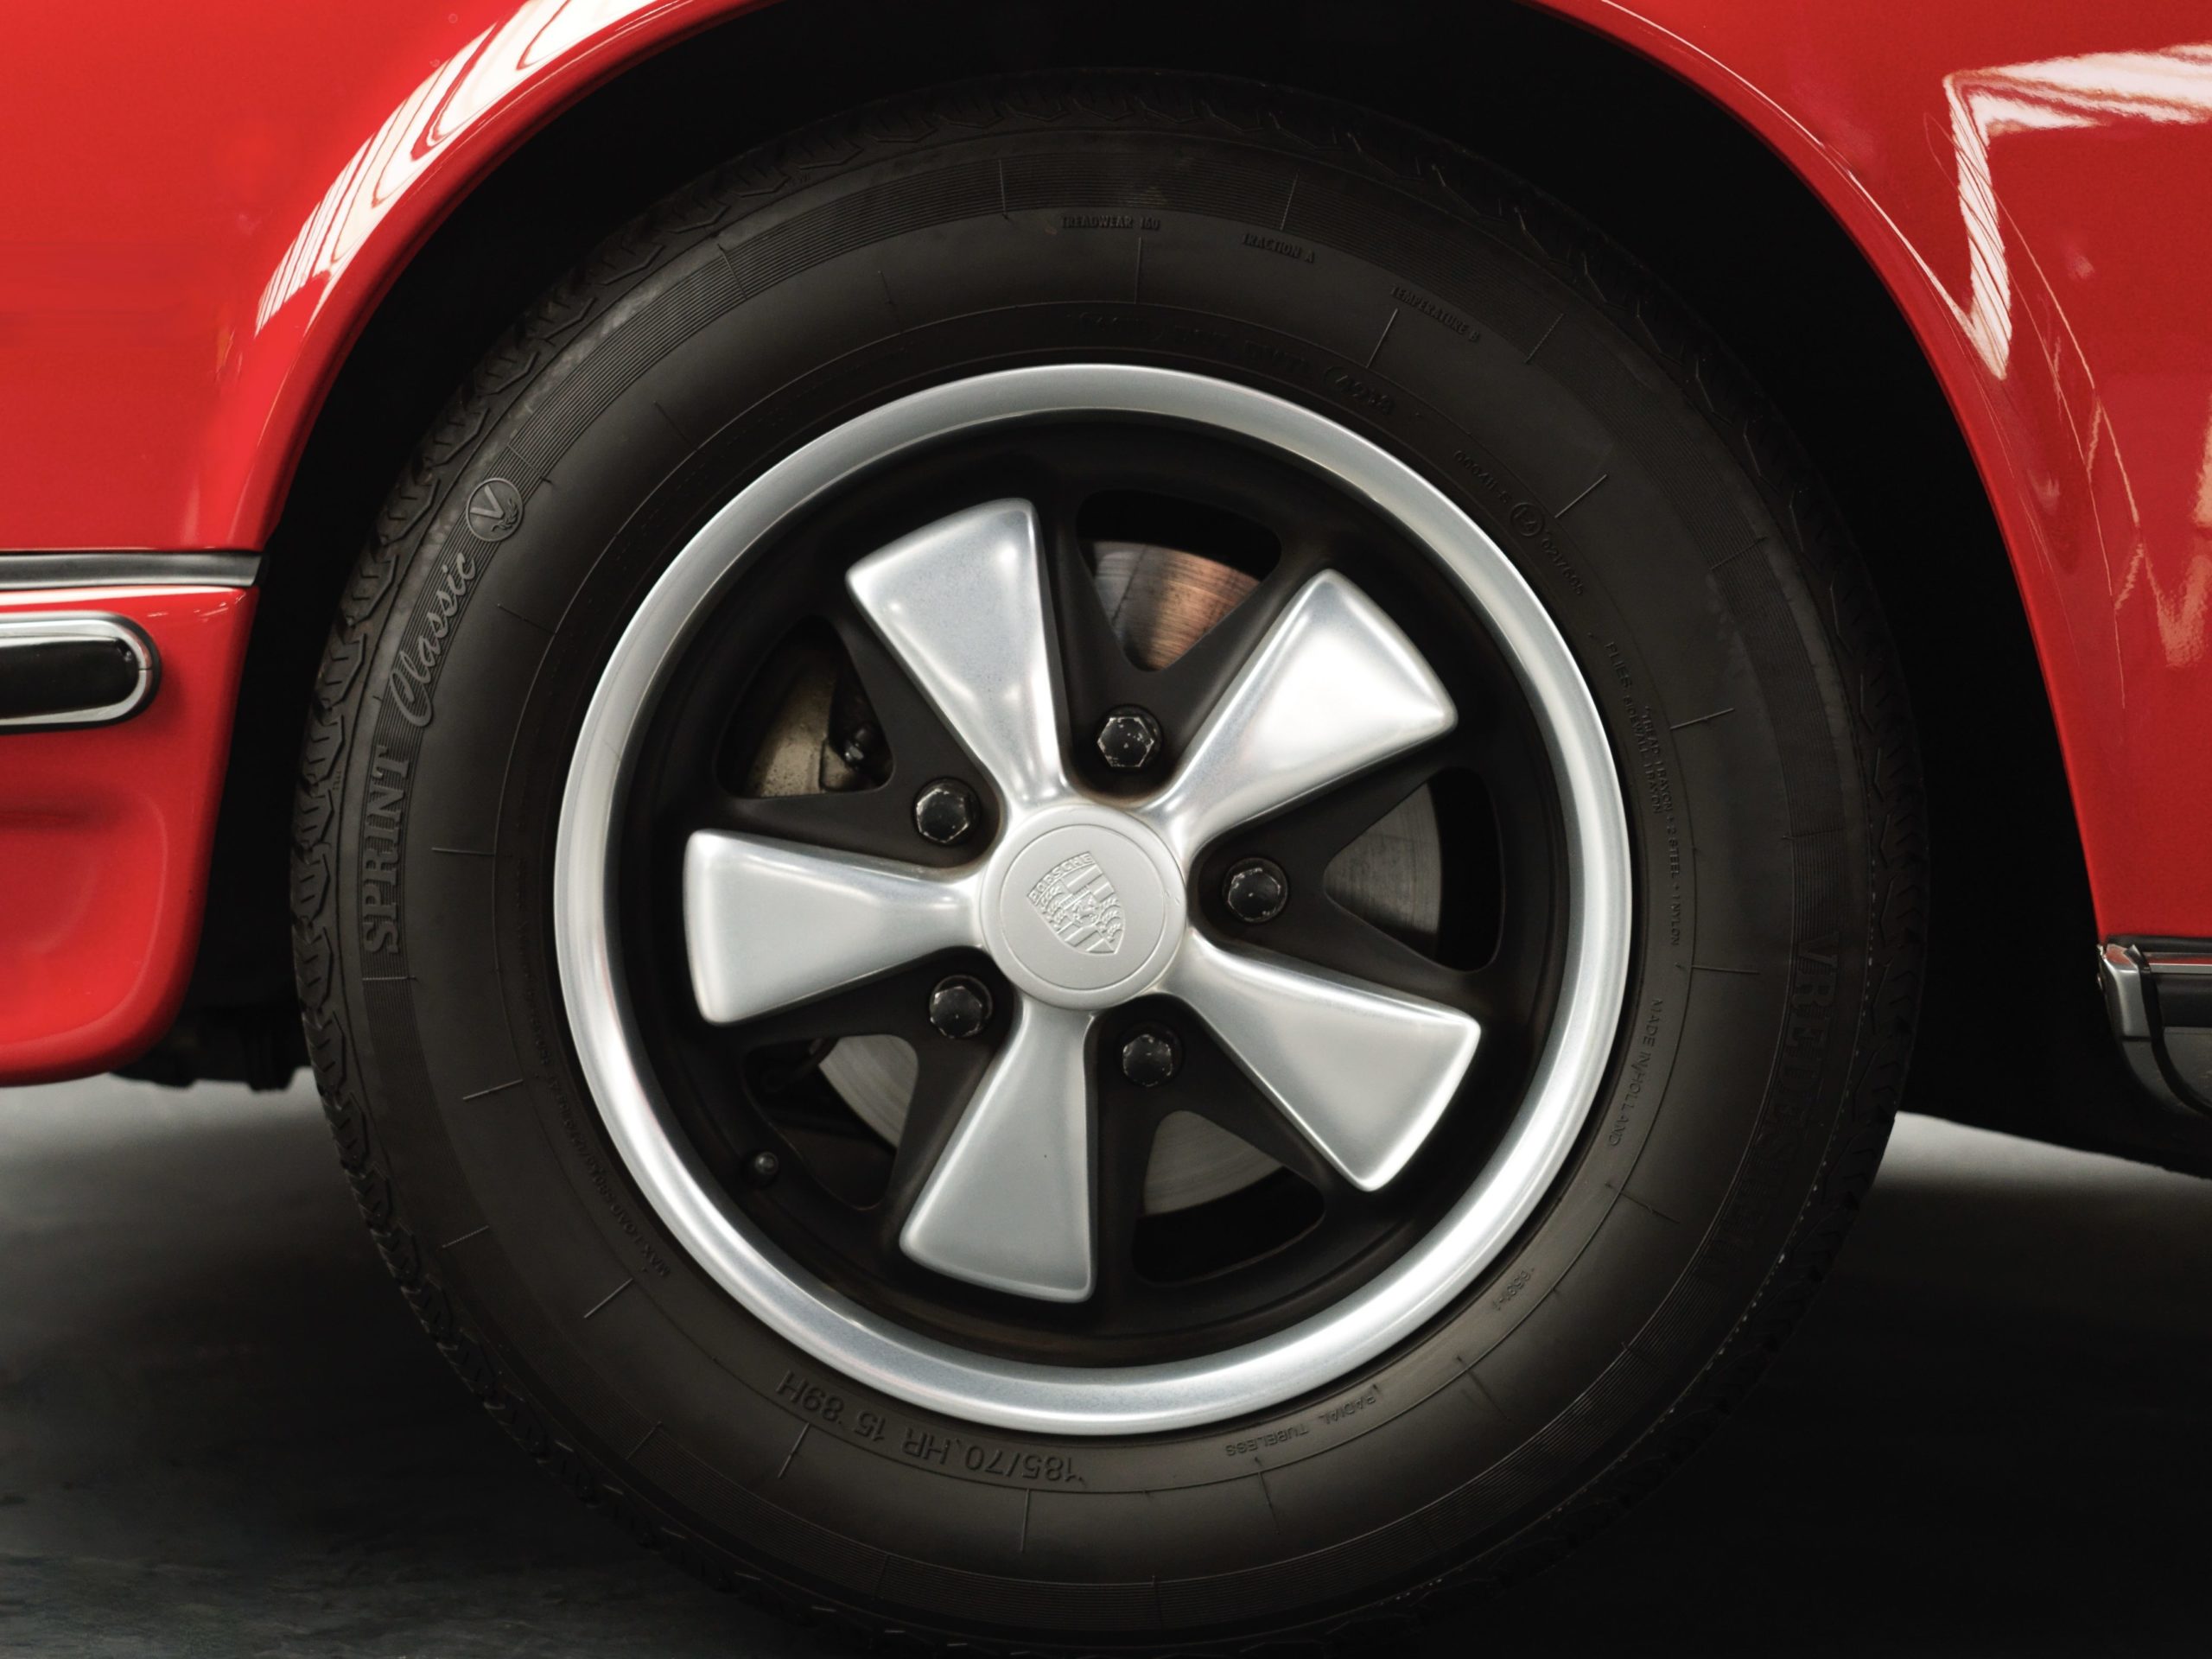 wheel of a 1973 Red Bahia Porsche 911 2.4E Targa fully restored in 2019 with 12.685 km and black leather interior